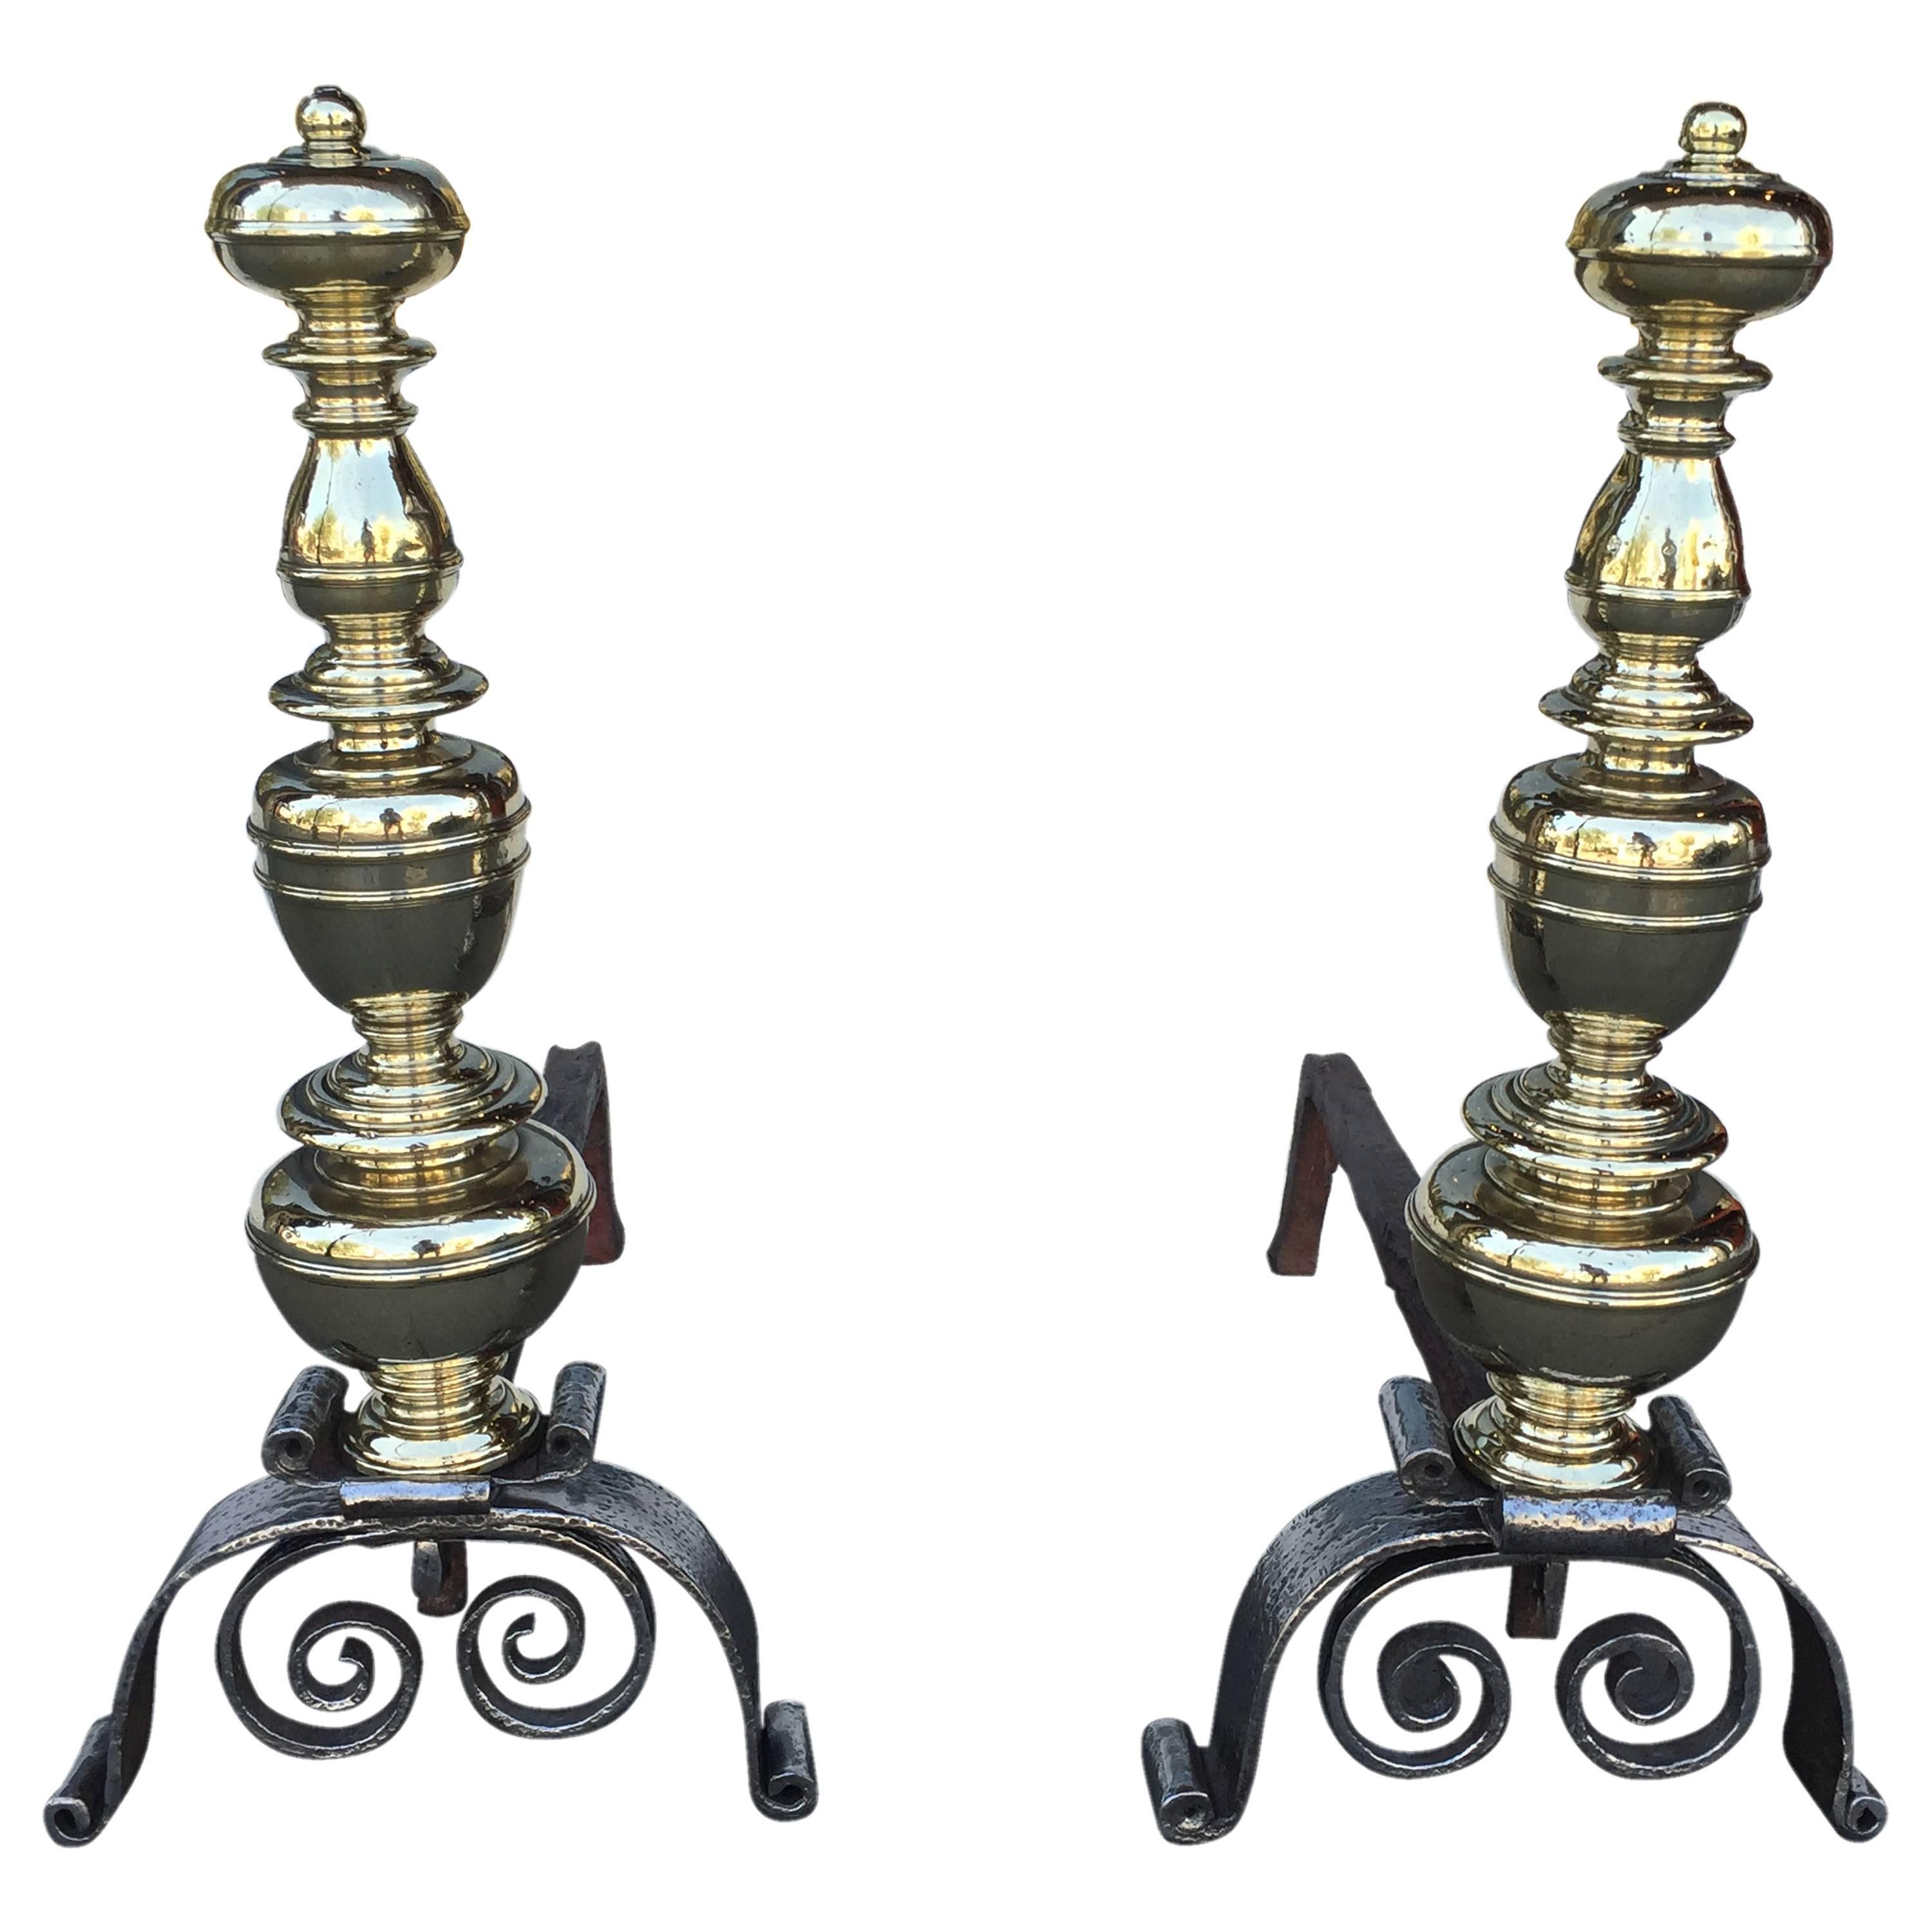 Pair of Brass and Iron Andirons from the Late 18th Century